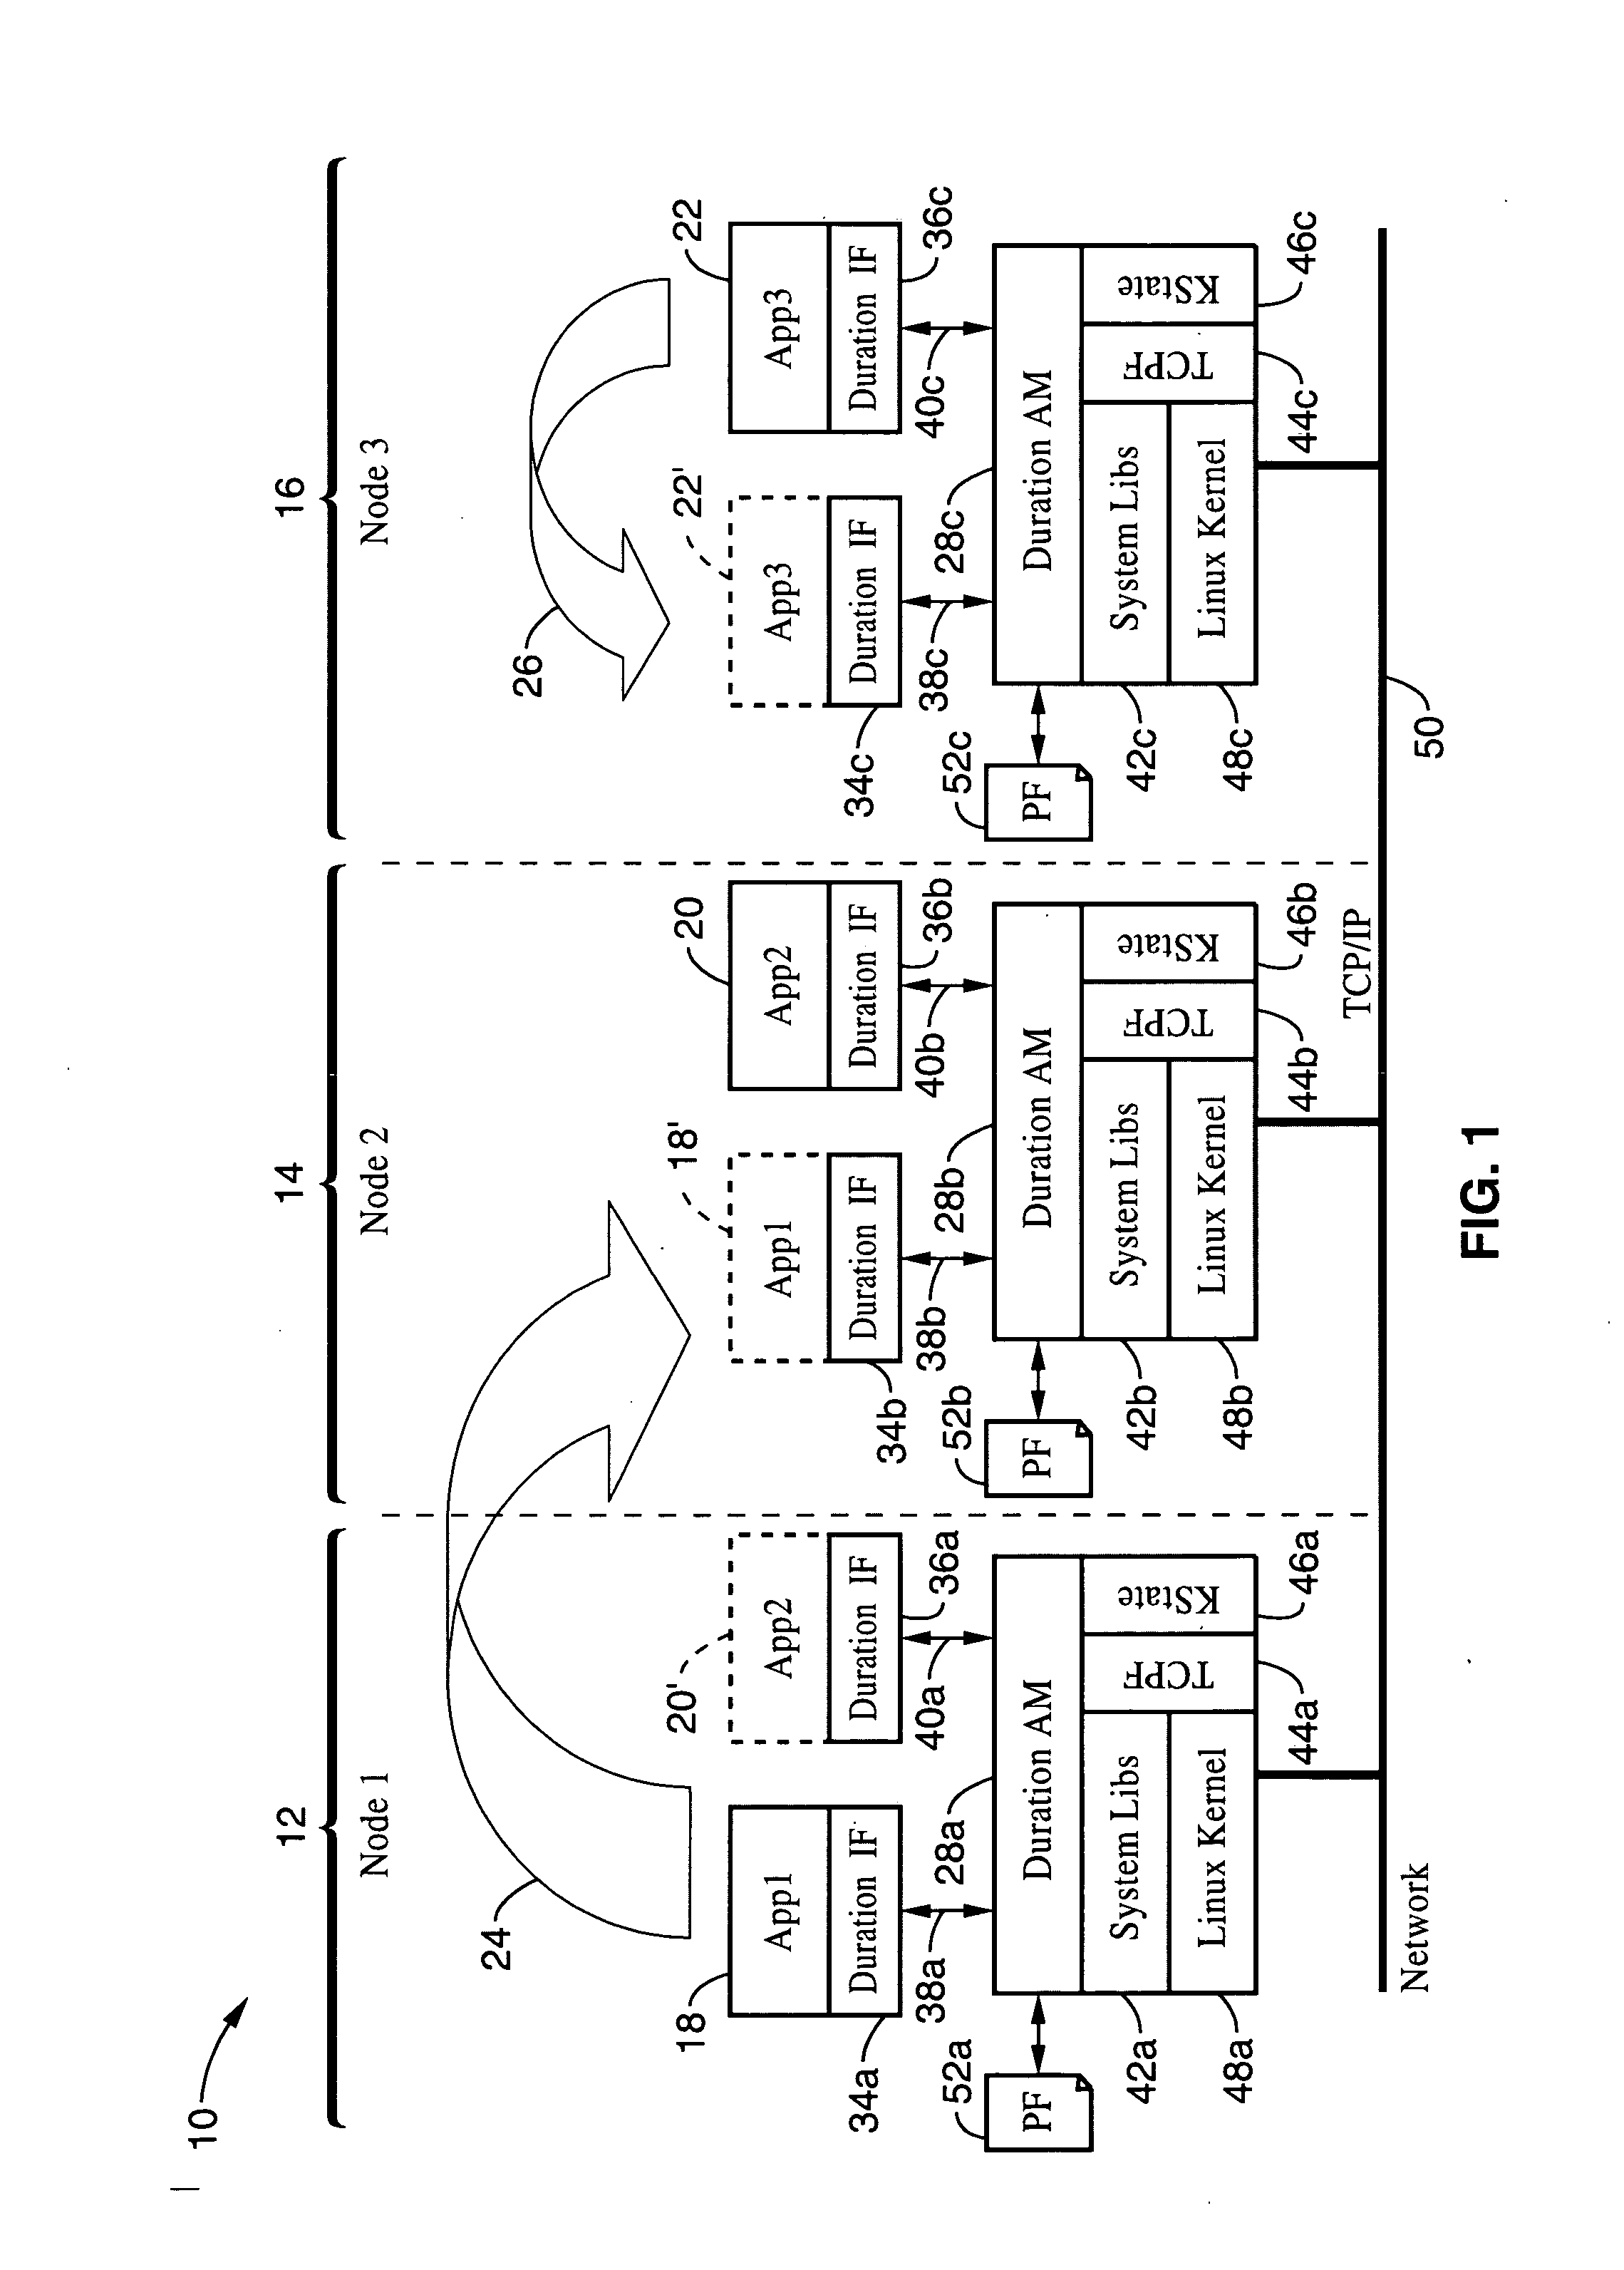 Method and system for providing high availability to computer applications